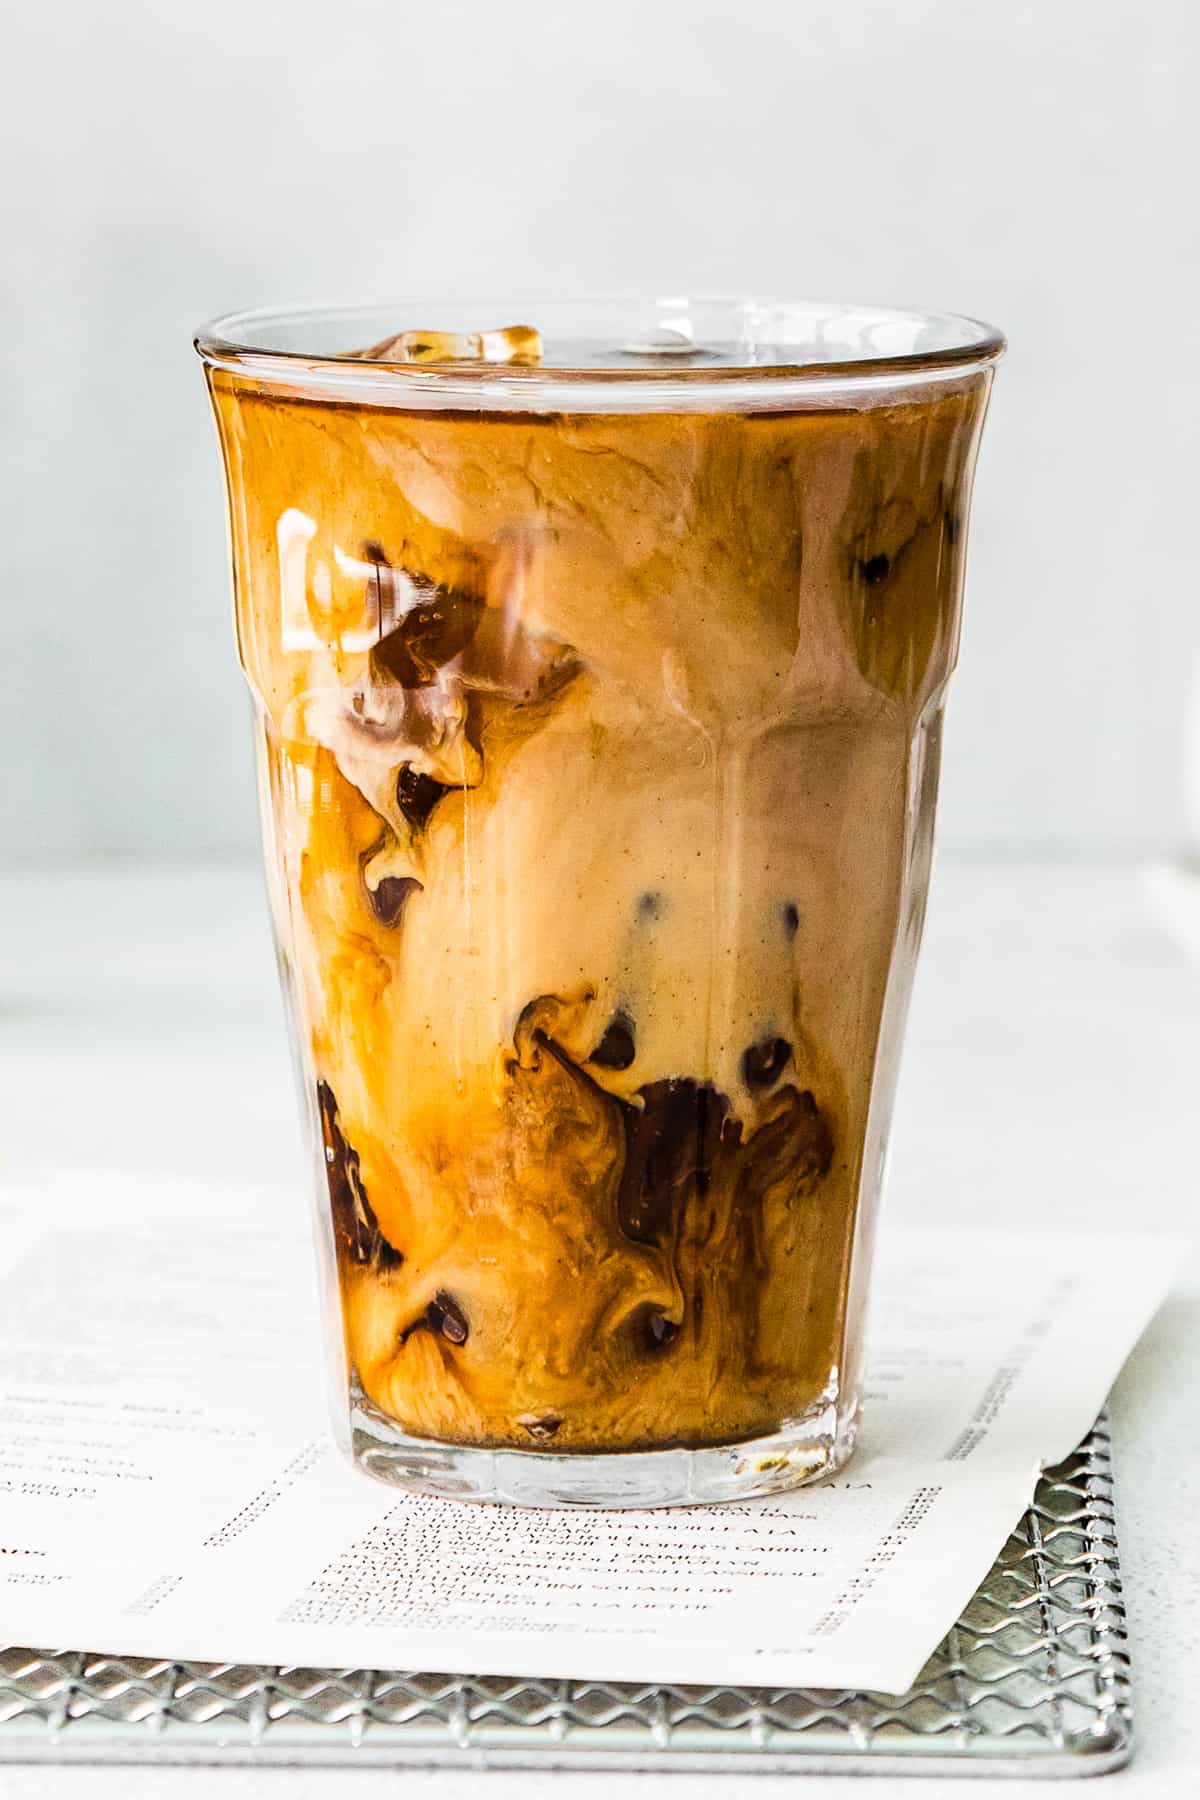 How to Make a Pumpkin Cream Cold Brew at Home